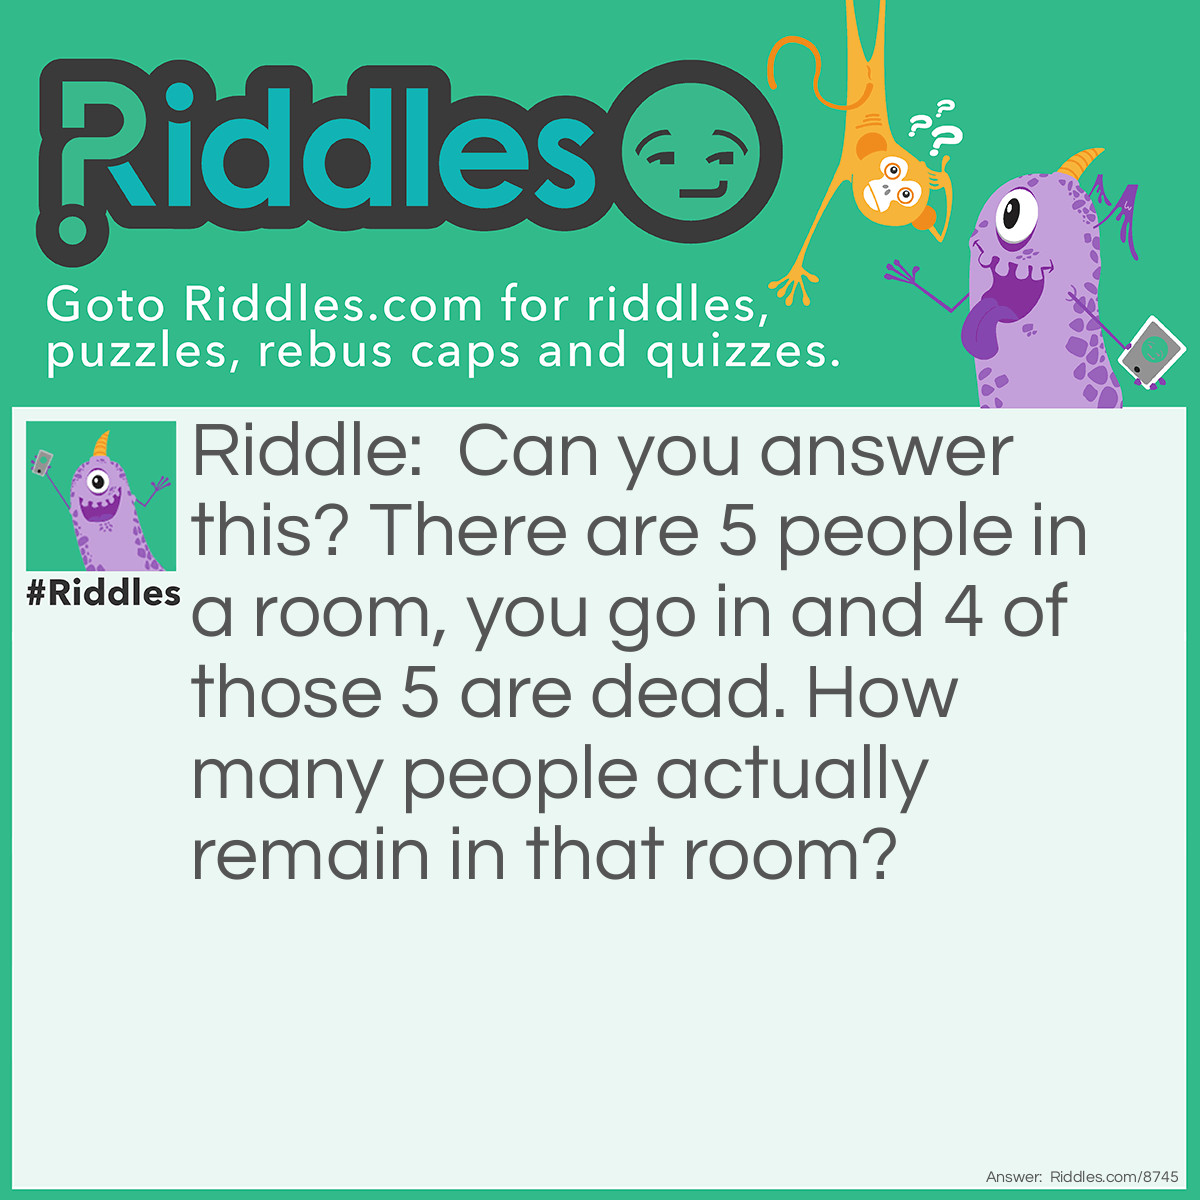 Riddle: Can you answer this? There are 5 people in a room, you go in and 4 of those 5 are dead. How many people actually remain in that room? Answer: Yes or no. The question was, "Can you answer this?"